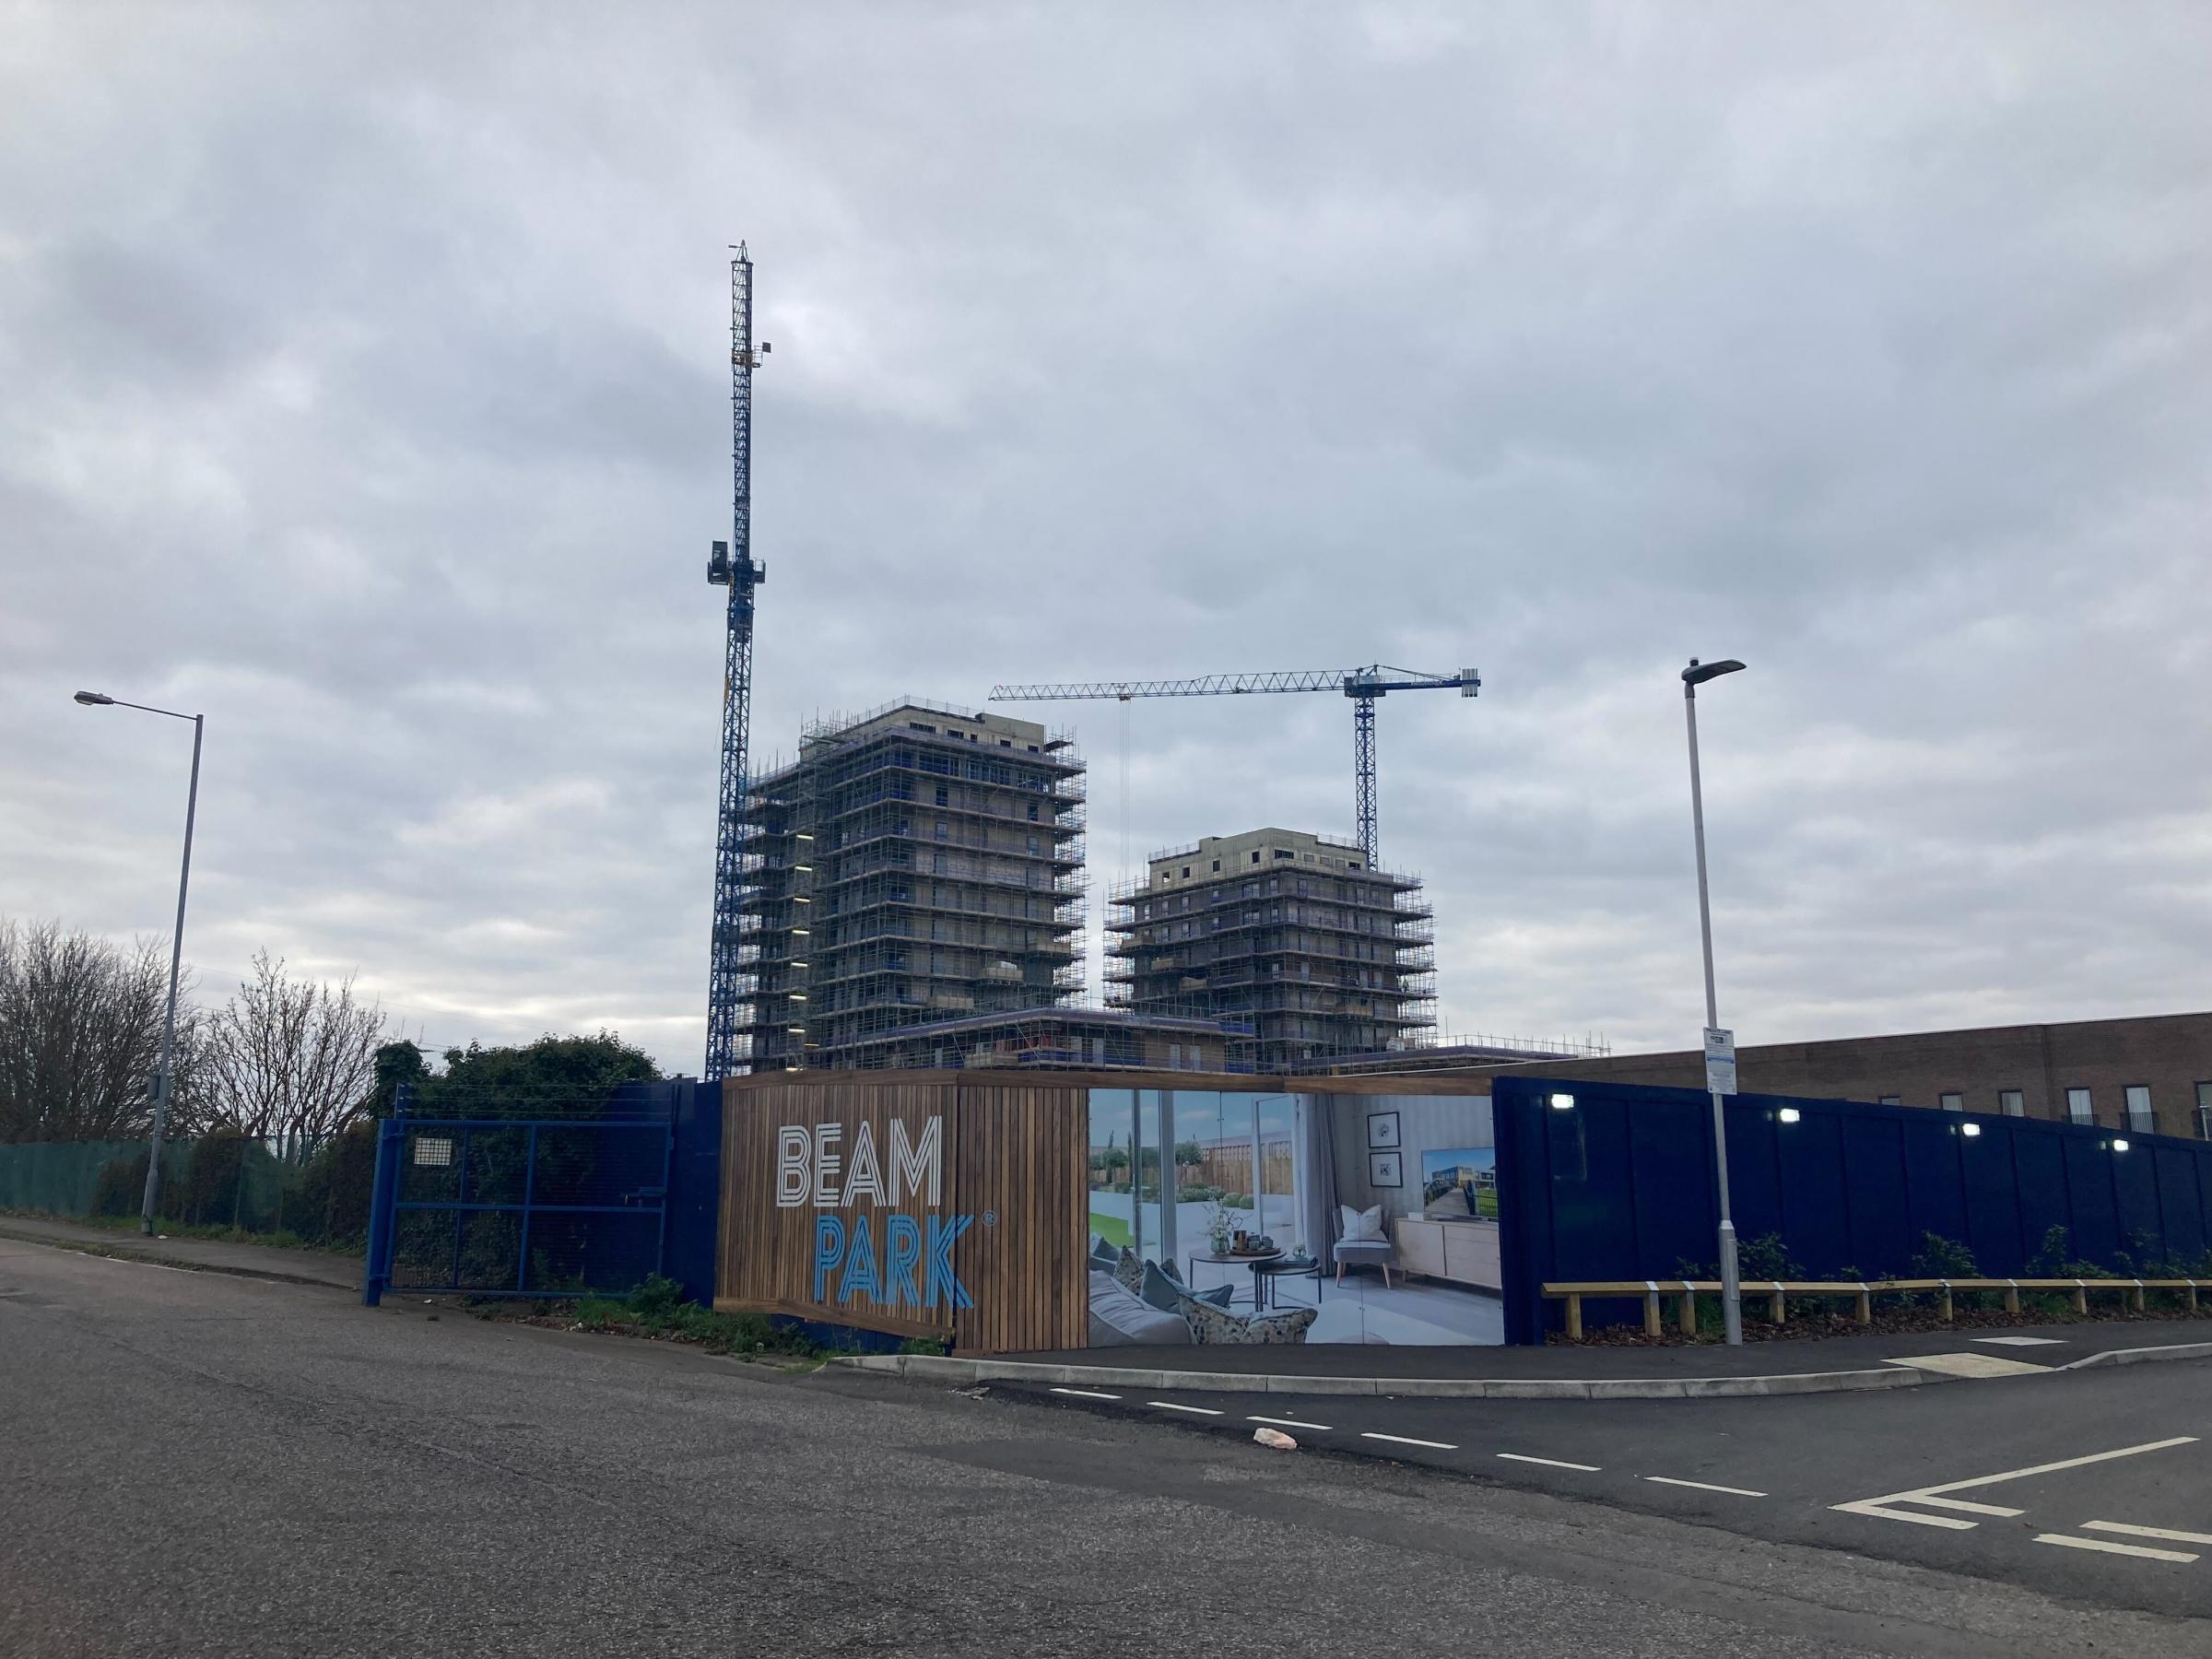 The site is now called Beam Park and will eventually deliver over 3,000 homes Credit: Ruby Gregory 